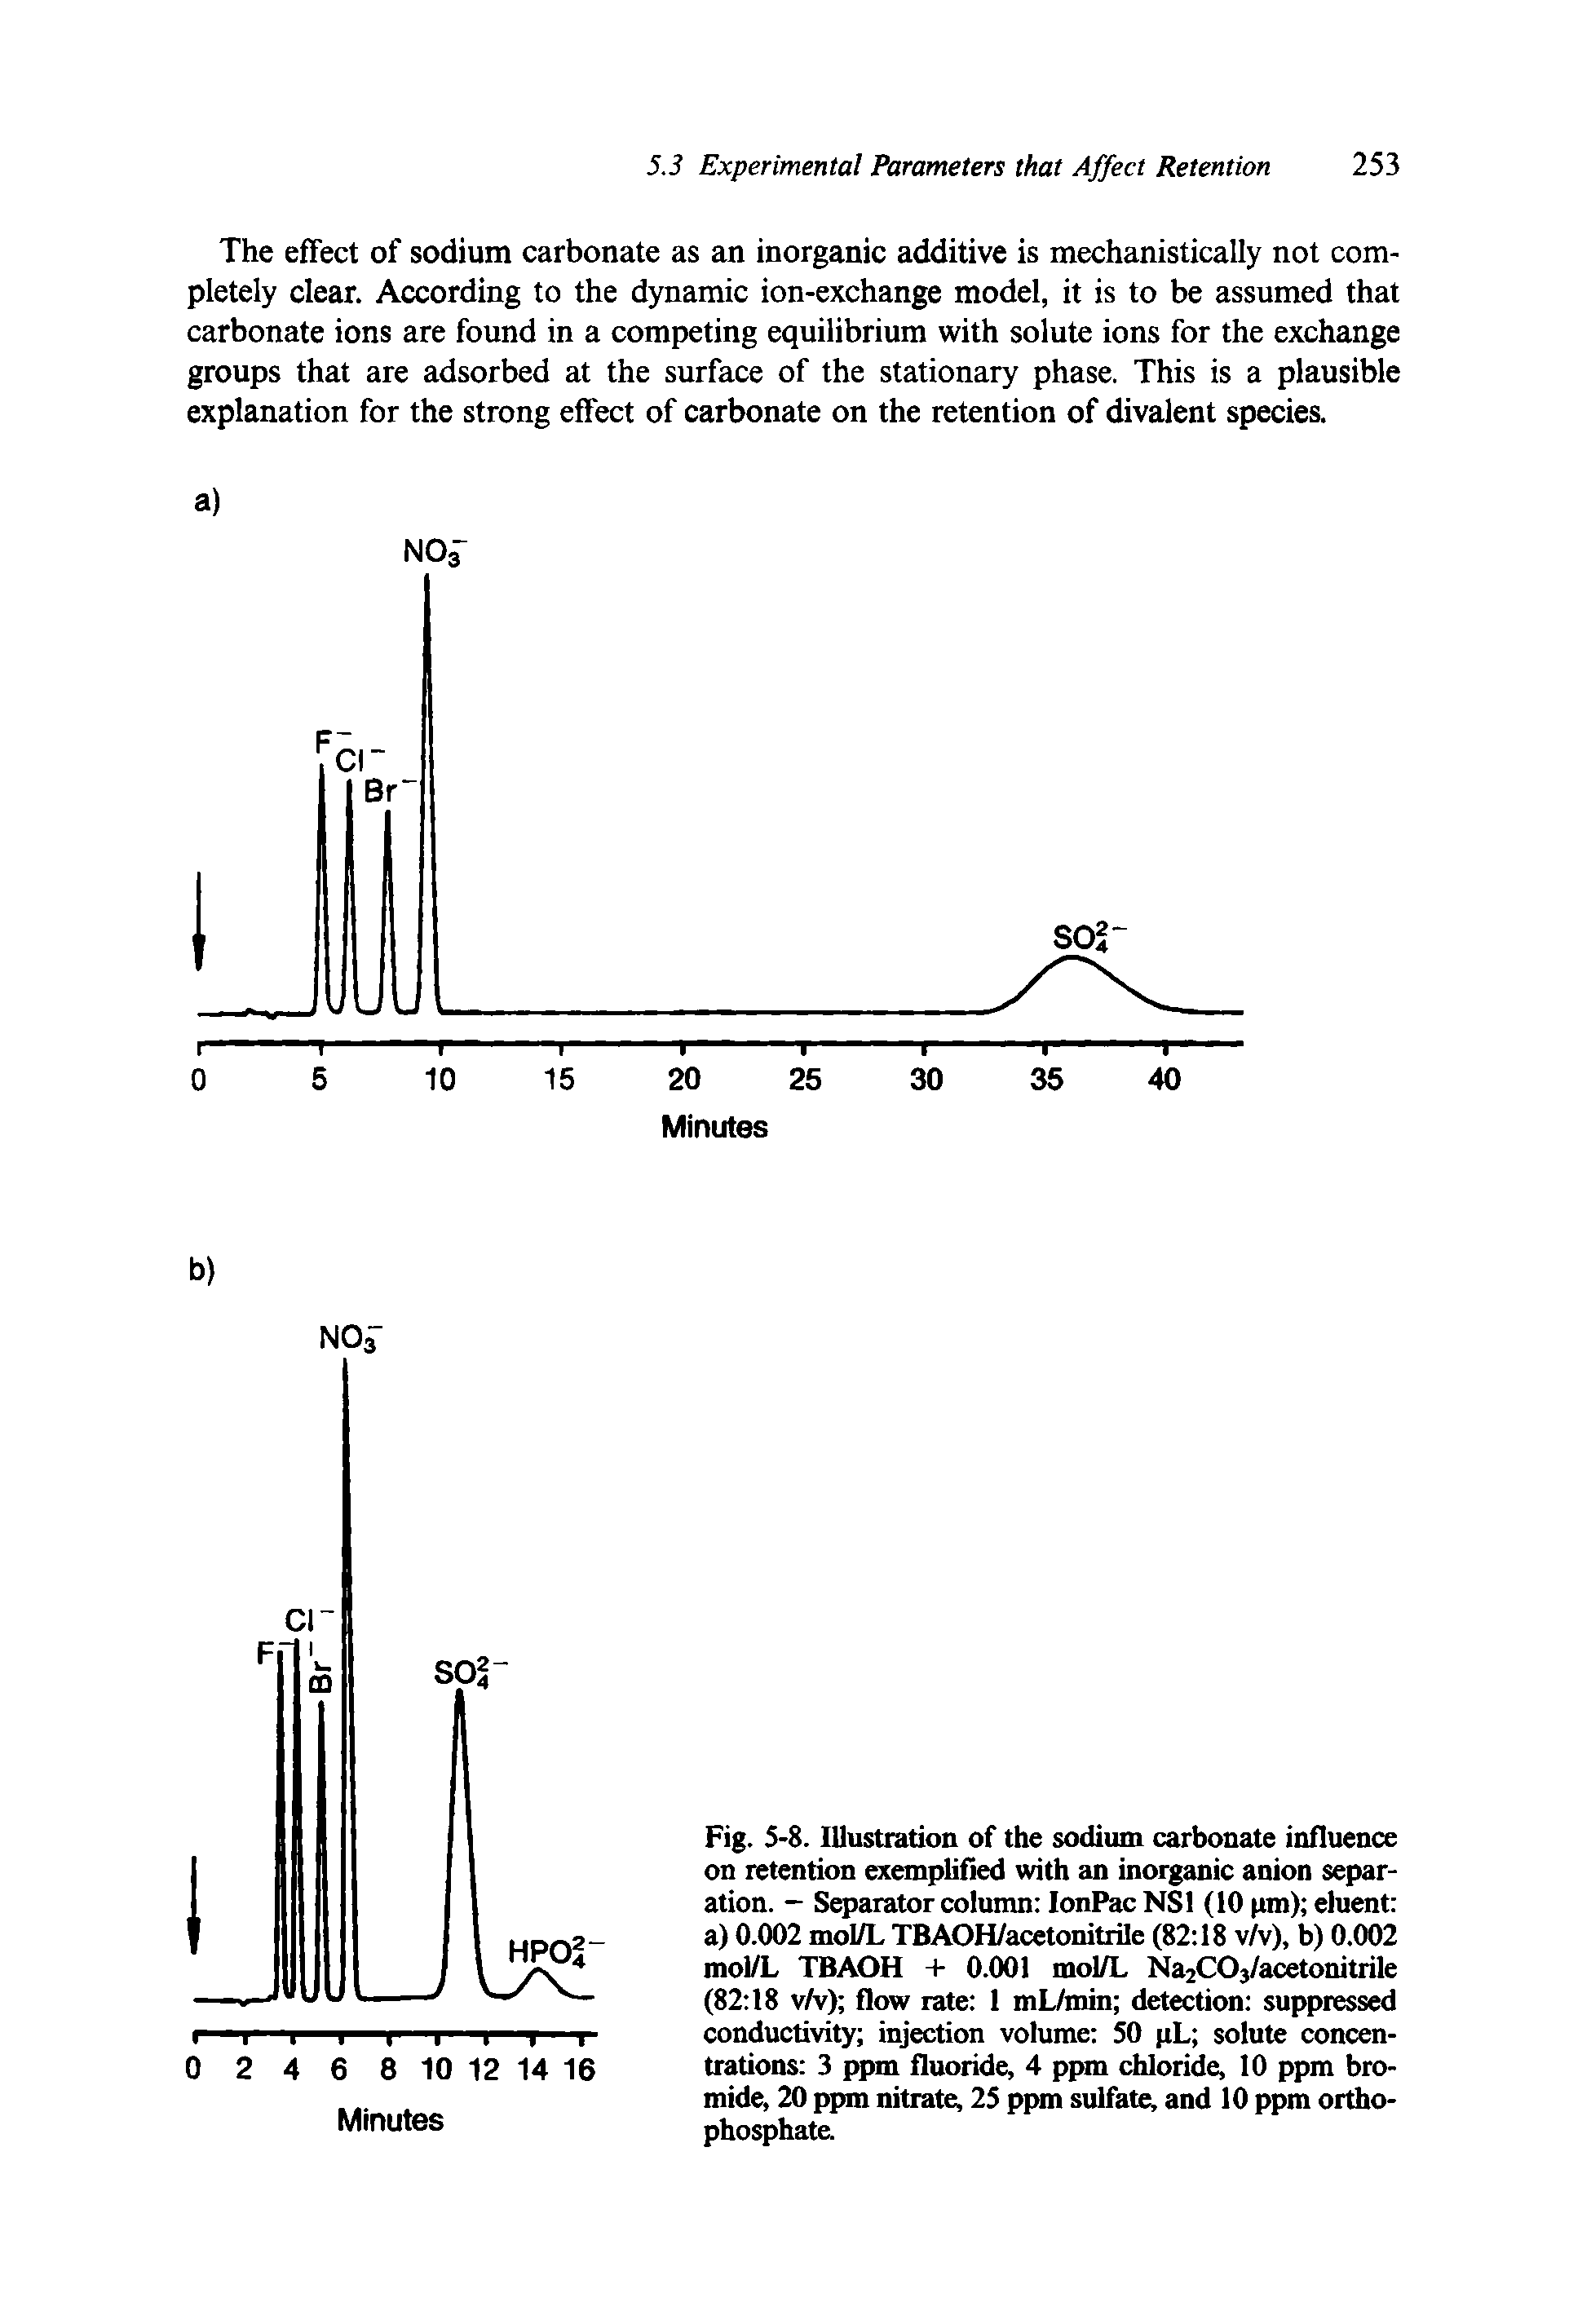 Fig. 5-8. Illustration of the sodium carbonate influence on retention exemplified with an inorganic anion separation. — Separator column IonPac NS1 (10 pm) eluent a) 0.002 mol/L TBAOH/acetonitrile (82 18 v/v), b) 0.002 mol/L TBAOH + 0.001 mol/L Na2C03/acetonitrile (82 18 v/v) flow rate 1 mL/min detection suppressed conductivity injection volume 50 pL solute concentrations 3 ppm fluoride, 4 ppm chloride, 10 ppm bromide, 20 ppm nitrate, 25 ppm sulfate, and 10 ppm orthophosphate.